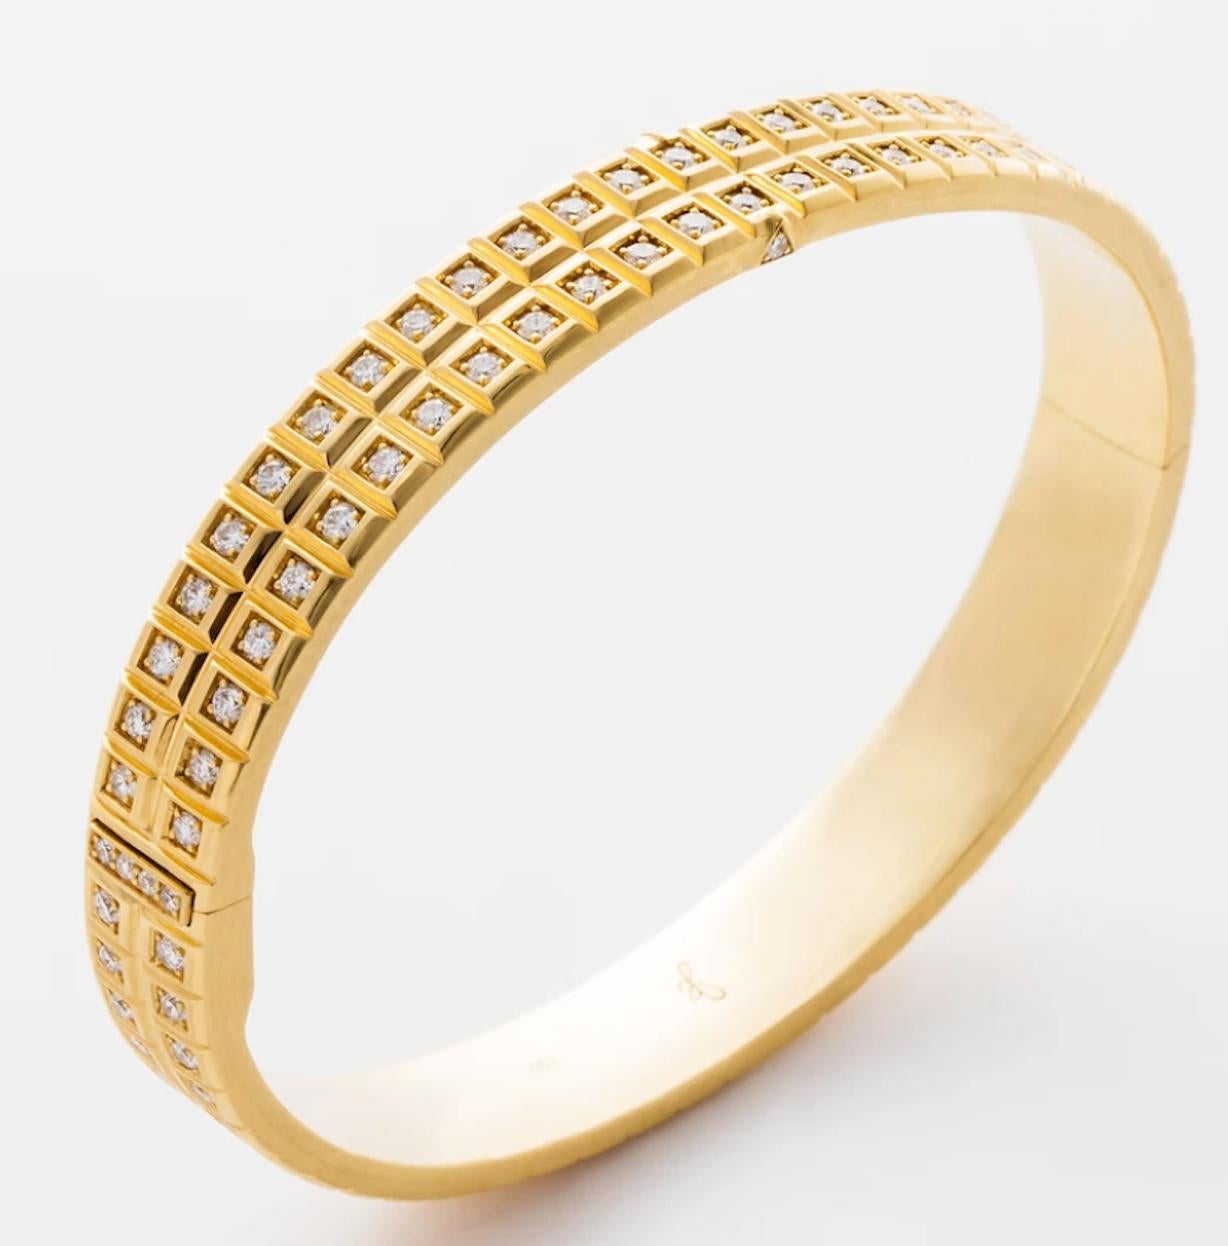 18 Karat Double Carousel Bracelet is set in solid 18k Yellow Gold with two rows of white diamonds and finished with a seamless secure clasp closure.
18k Yellow Gold, White Diamonds
From the James Banks Code Collection 
